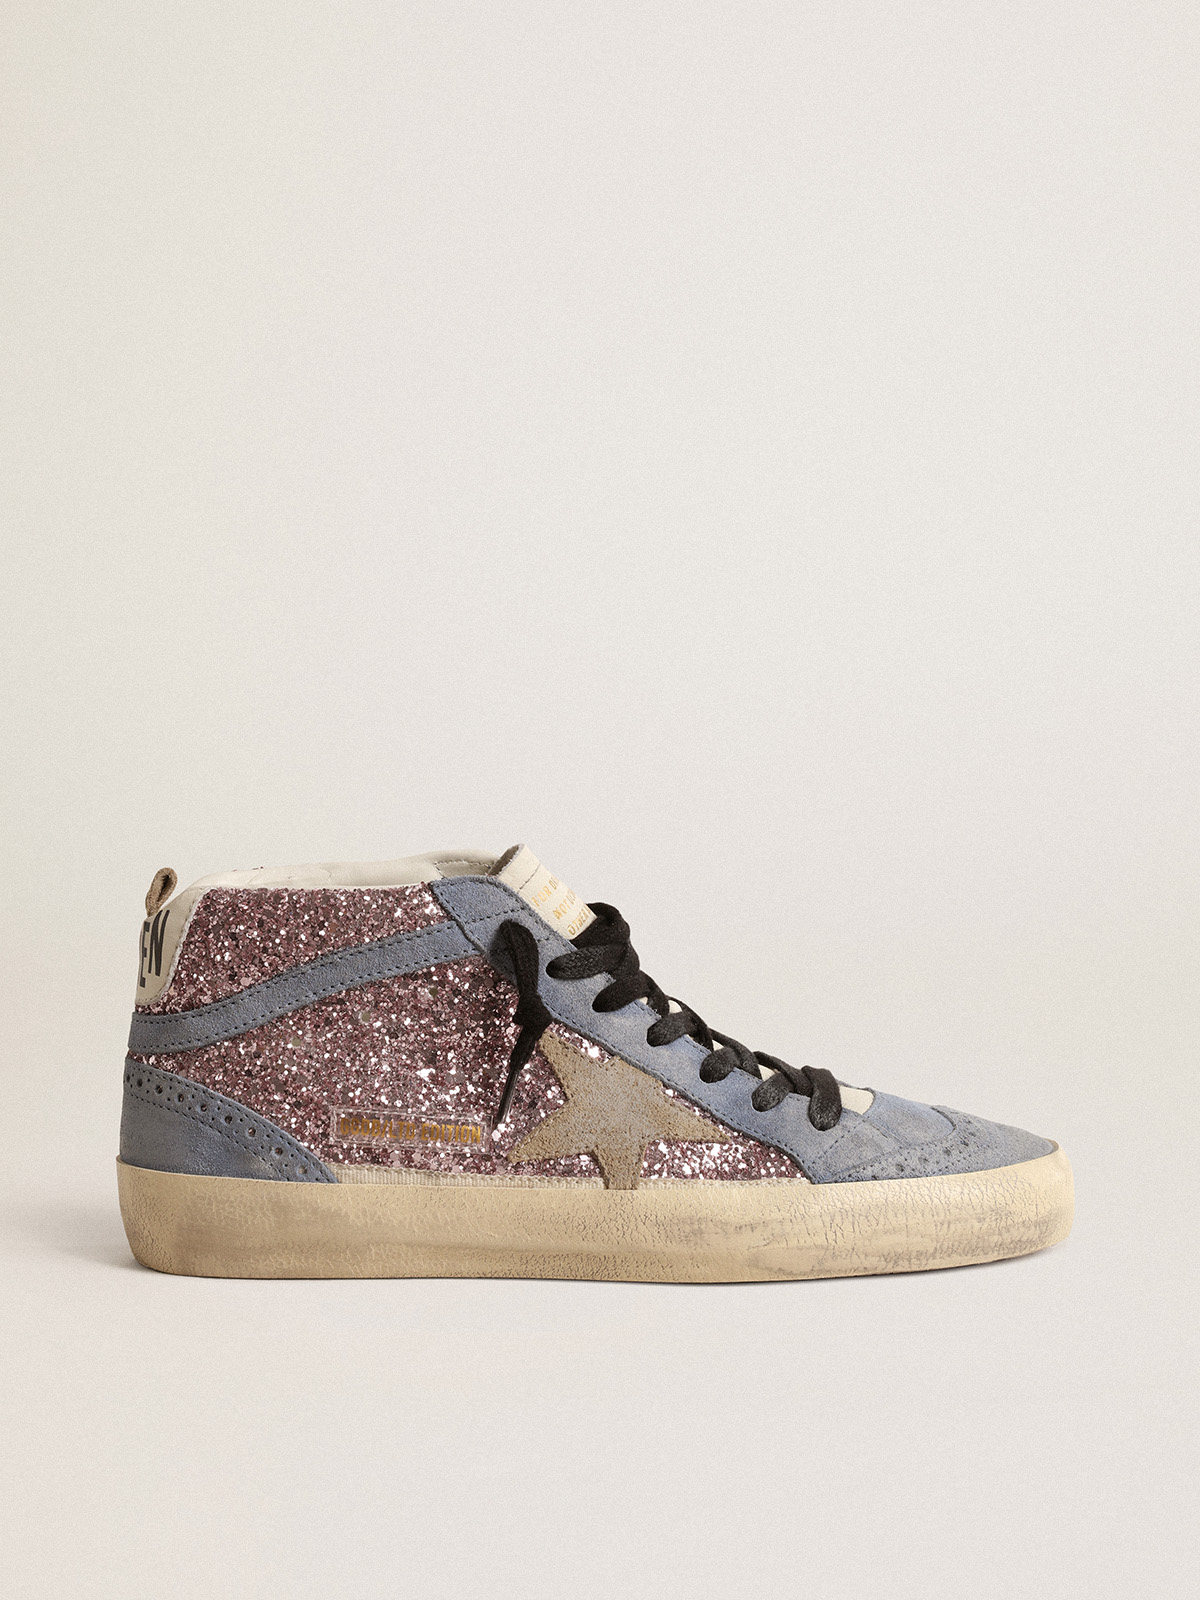 Mid Star LTD in lilac glitter with light blue suede inserts | Golden Goose